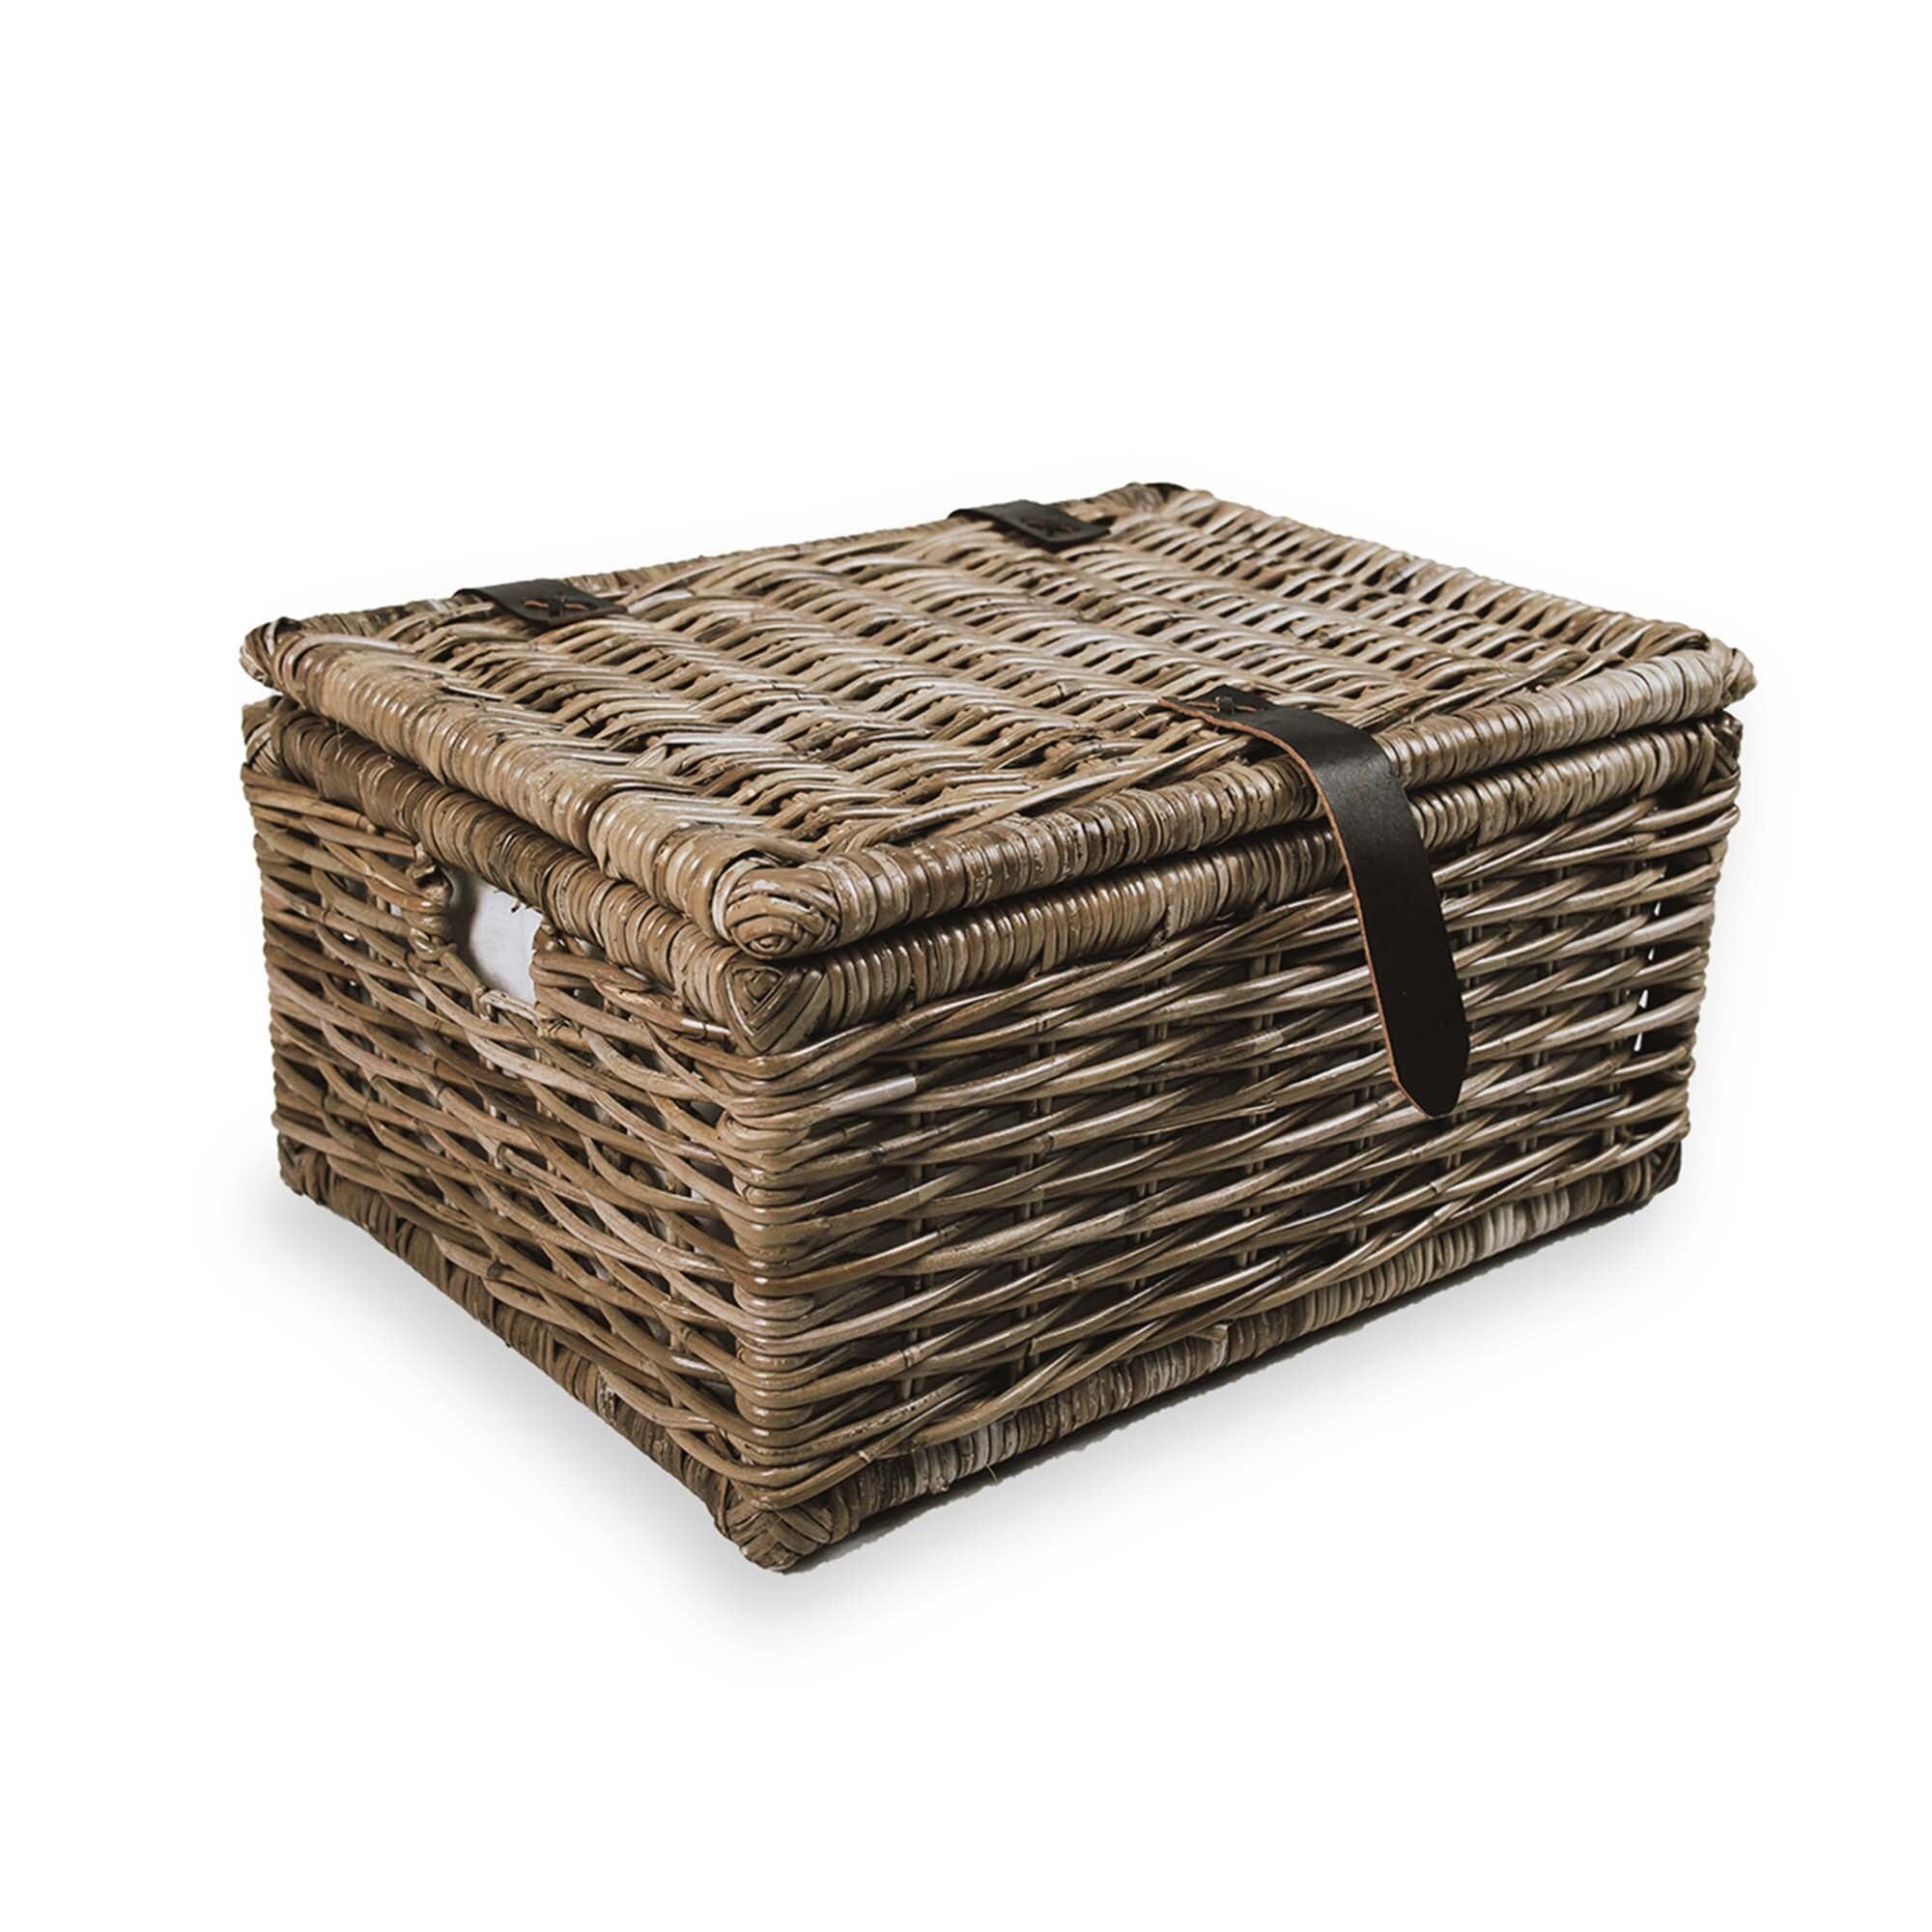 Large Baskets & Storage Containers at